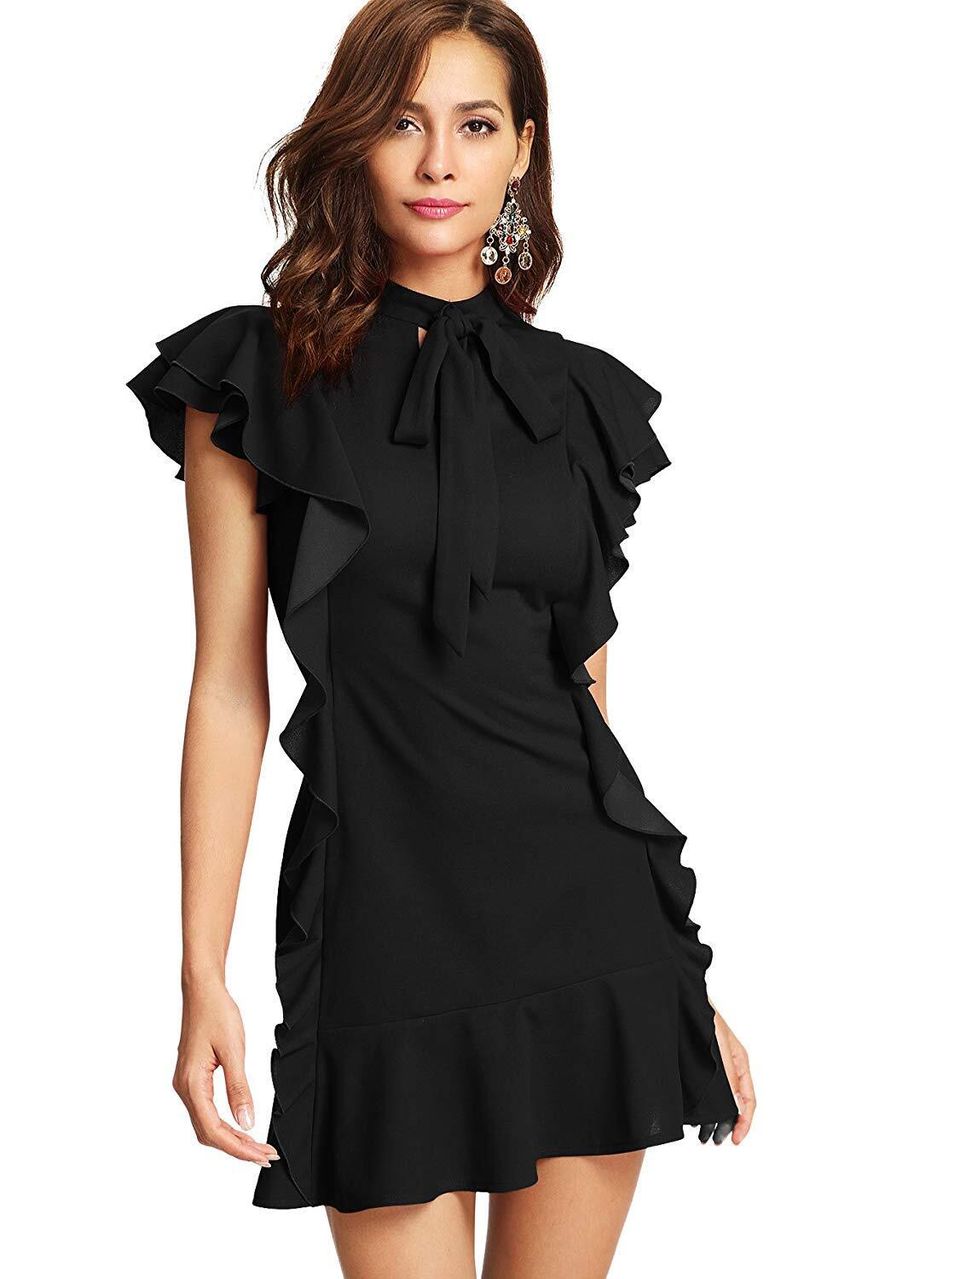 Stylish Black Dresses To Wear To A Wedding | HuffPost Life